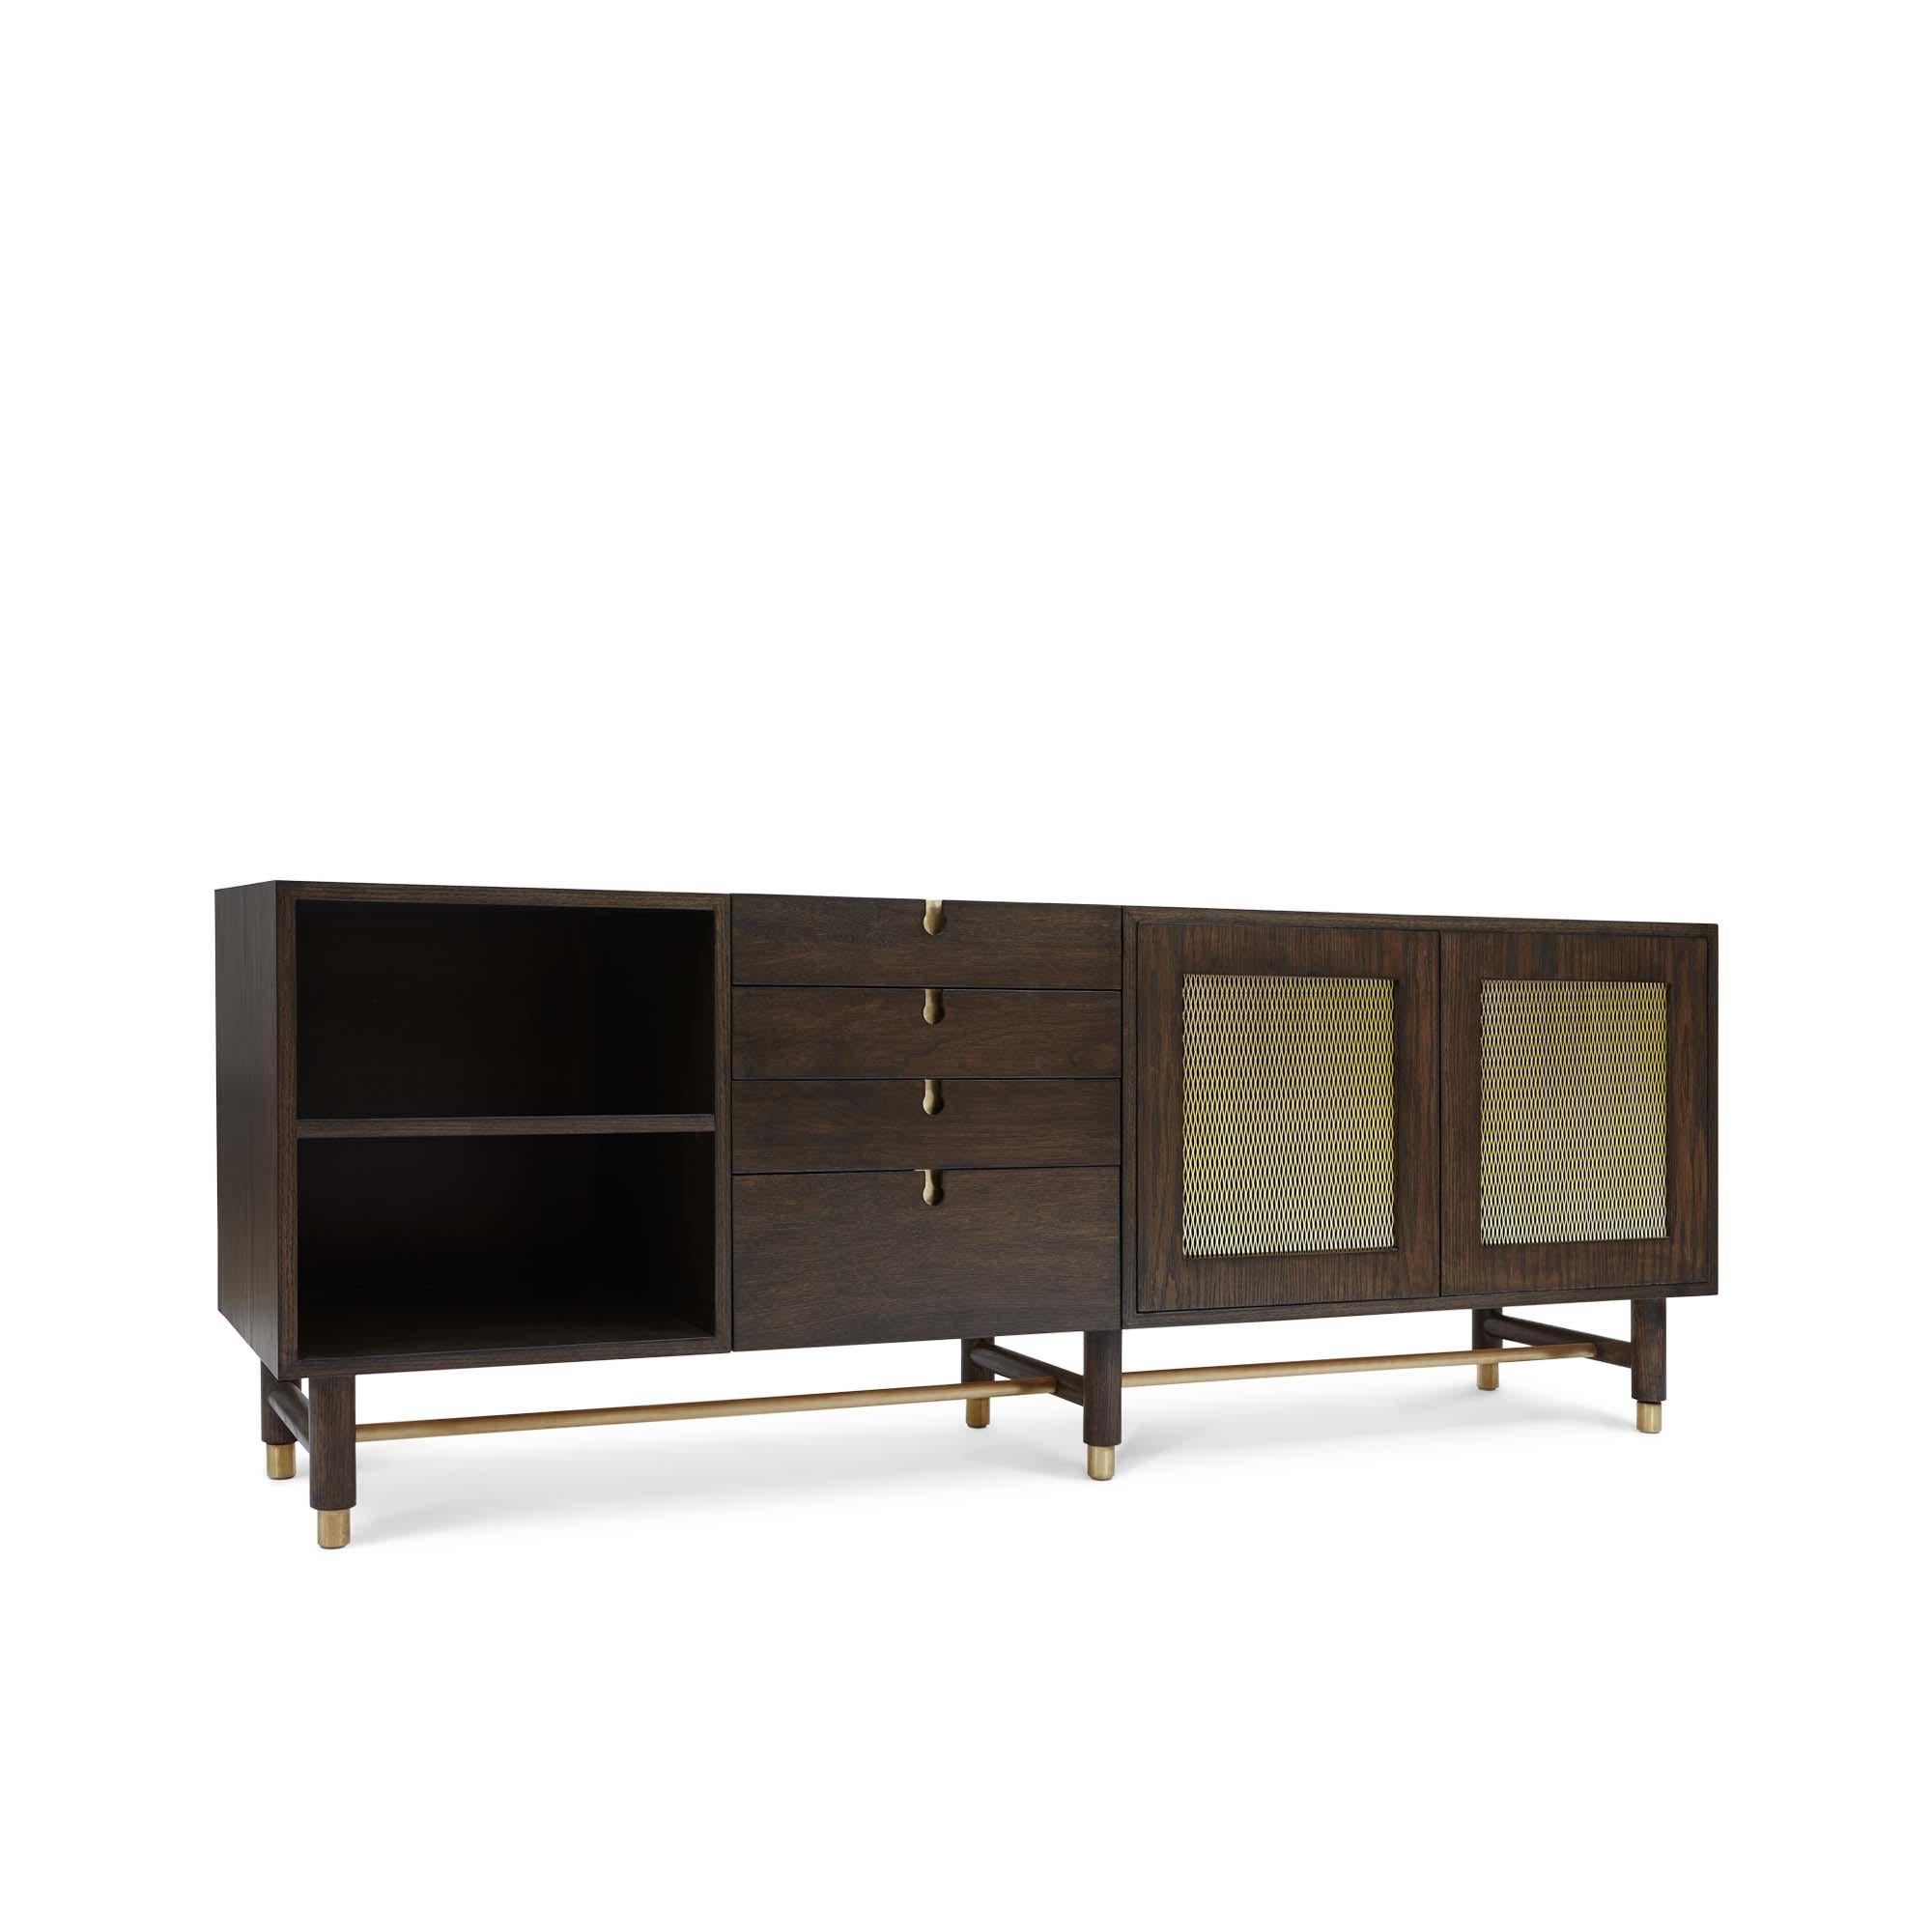 The Niguel Credenza features brass cap feet, a brass cross-stretcher bar and brass inlaid details with brass mesh sliding bypass doors. Shown here in dark grey washed oak and satin brass. 

Oak and brass niguel credenza by Lawson-Fenning.

The